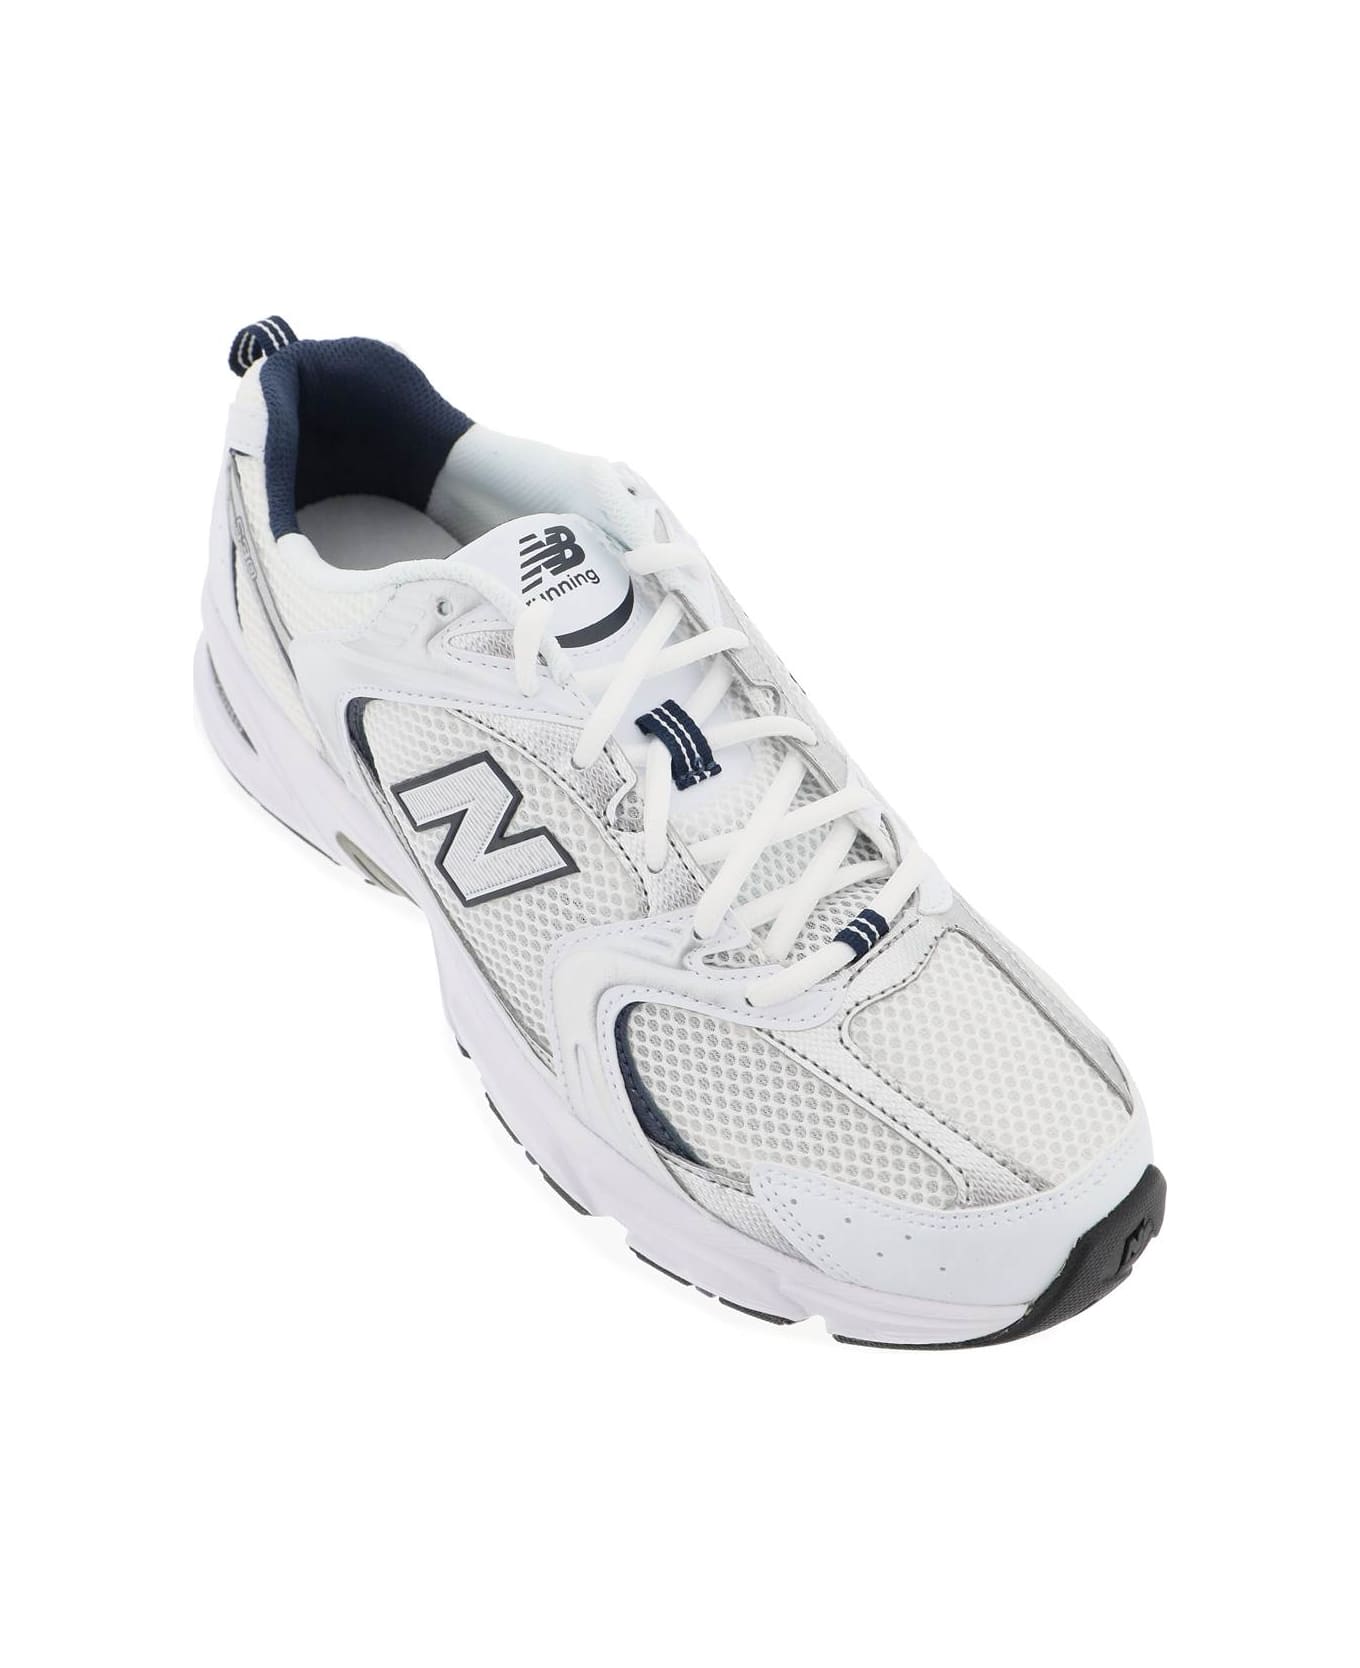 New Balance 530 Sneakers - WHITE BLUE D (White)